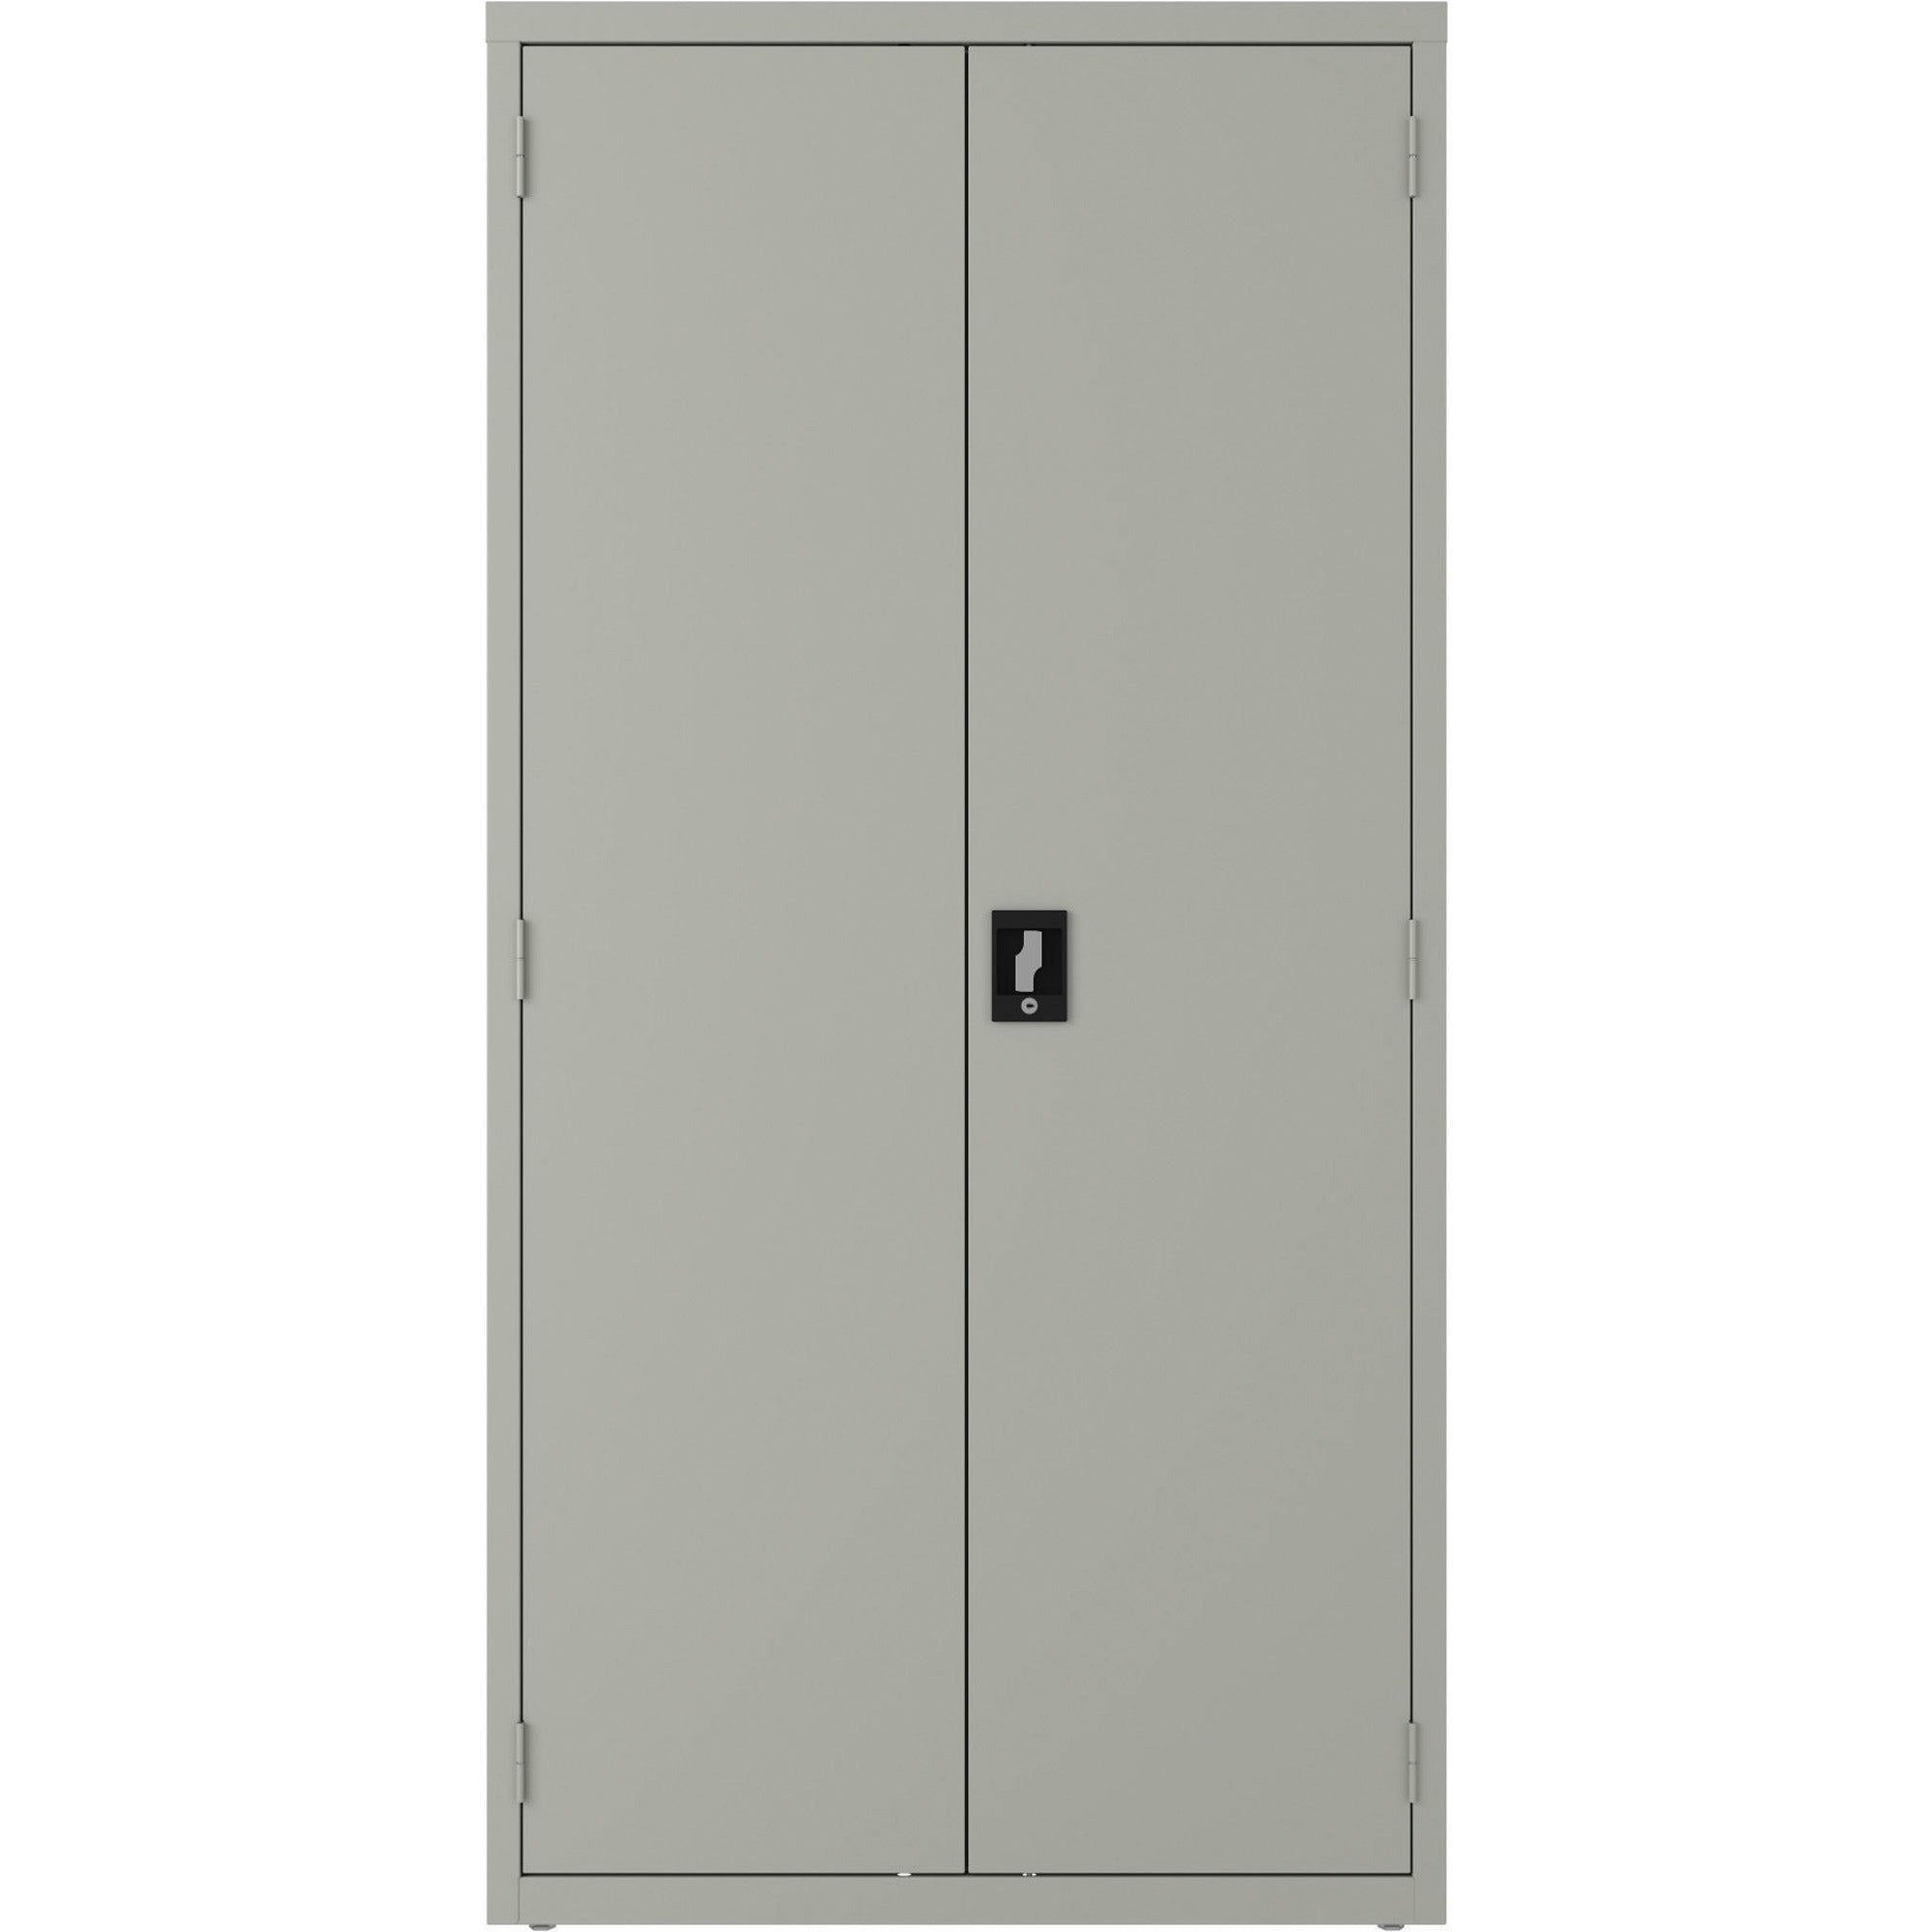 lorell-wardrobe-storage-cabinet-36-x-18-x-72-2-x-shelfves-durable-welded-recessed-handle-removable-lock-locking-system-adjustable-shelf-light-gray-steel-recycled_llr03089 - 2